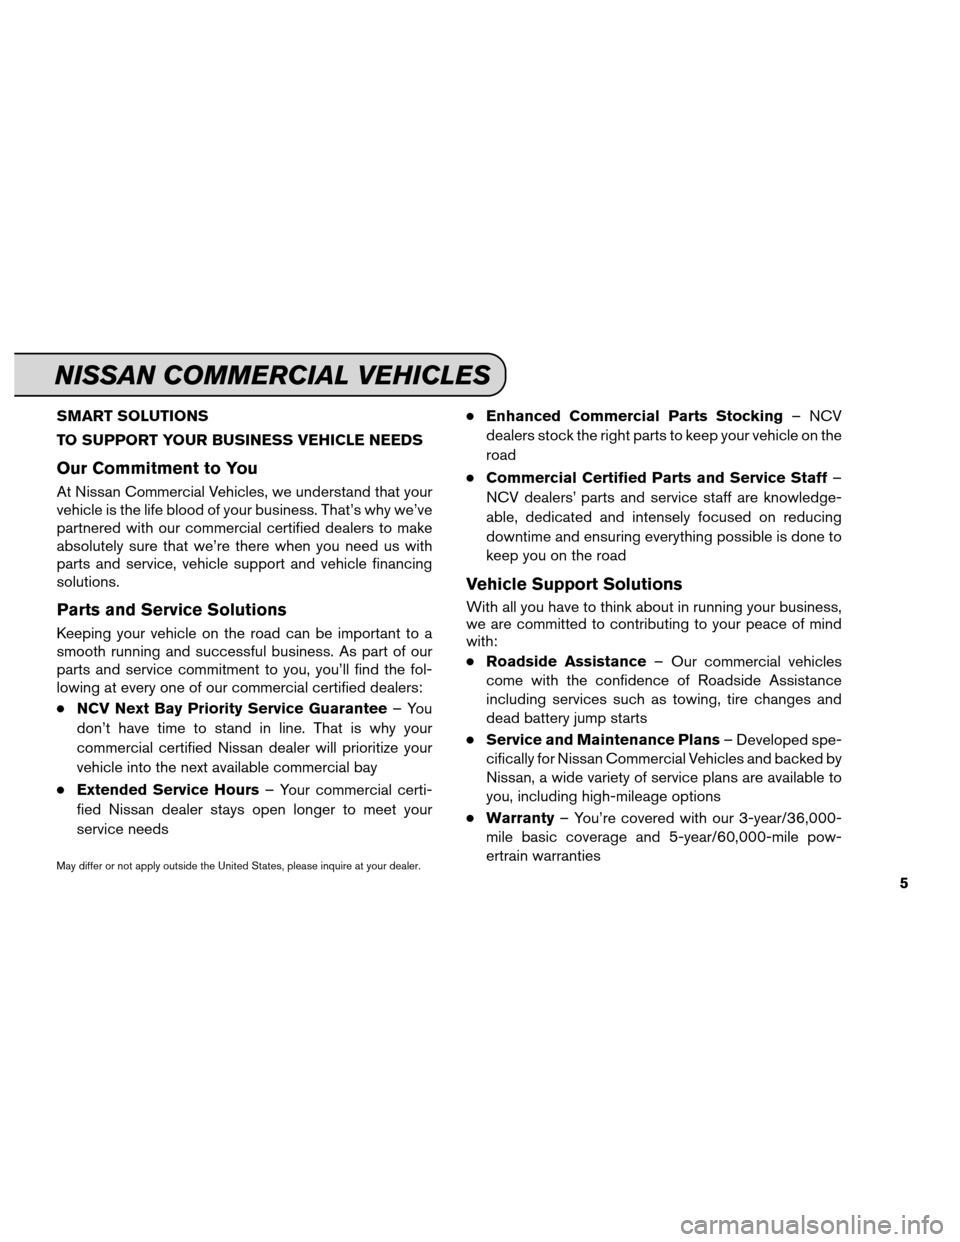 NISSAN XTERRA 2013 N50 / 2.G Service And Maintenance Guide SMART SOLUTIONS
TO SUPPORT YOUR BUSINESS VEHICLE NEEDS
Our Commitment to You
At Nissan Commercial Vehicles, we understand that your
vehicle is the life blood of your business. That’s why we’ve
par